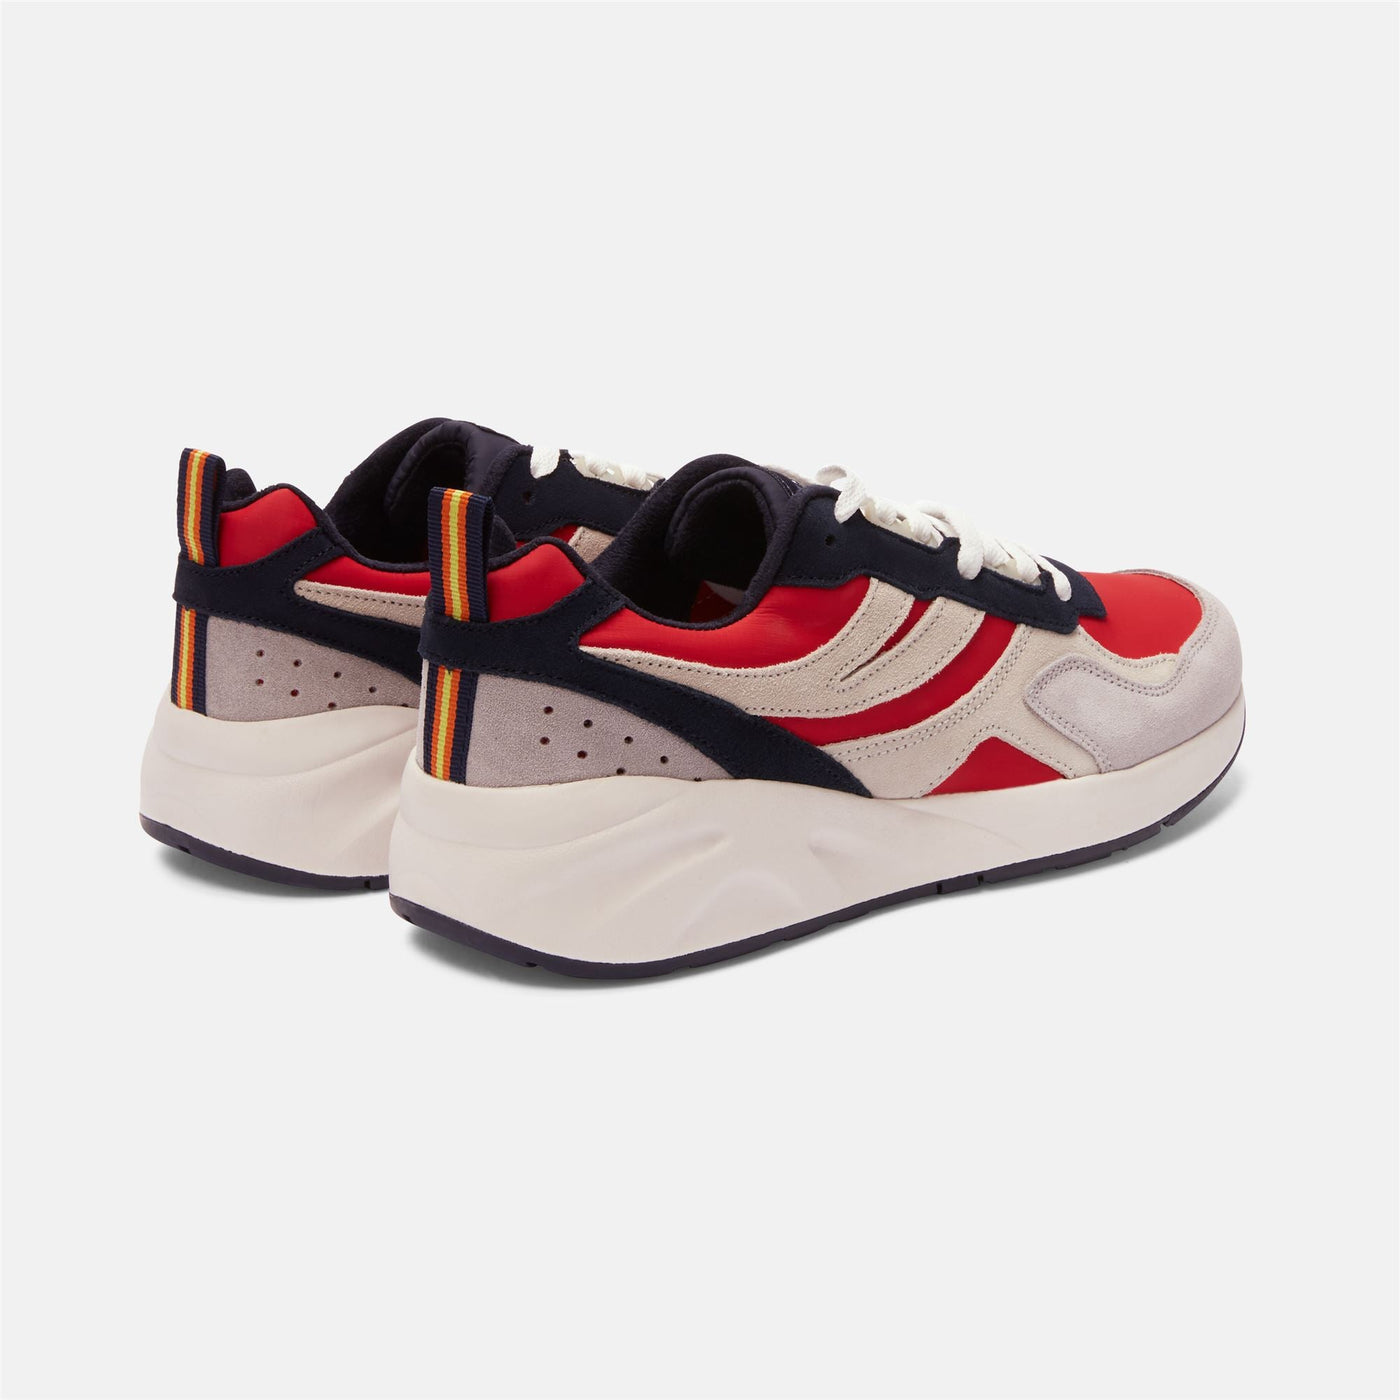 Sport Shoes Unisex TRAINING 3.0 LACES Low Cut Red - Lt Gray - White - Blu Navy | kway Dressed Side (jpg Rgb)		